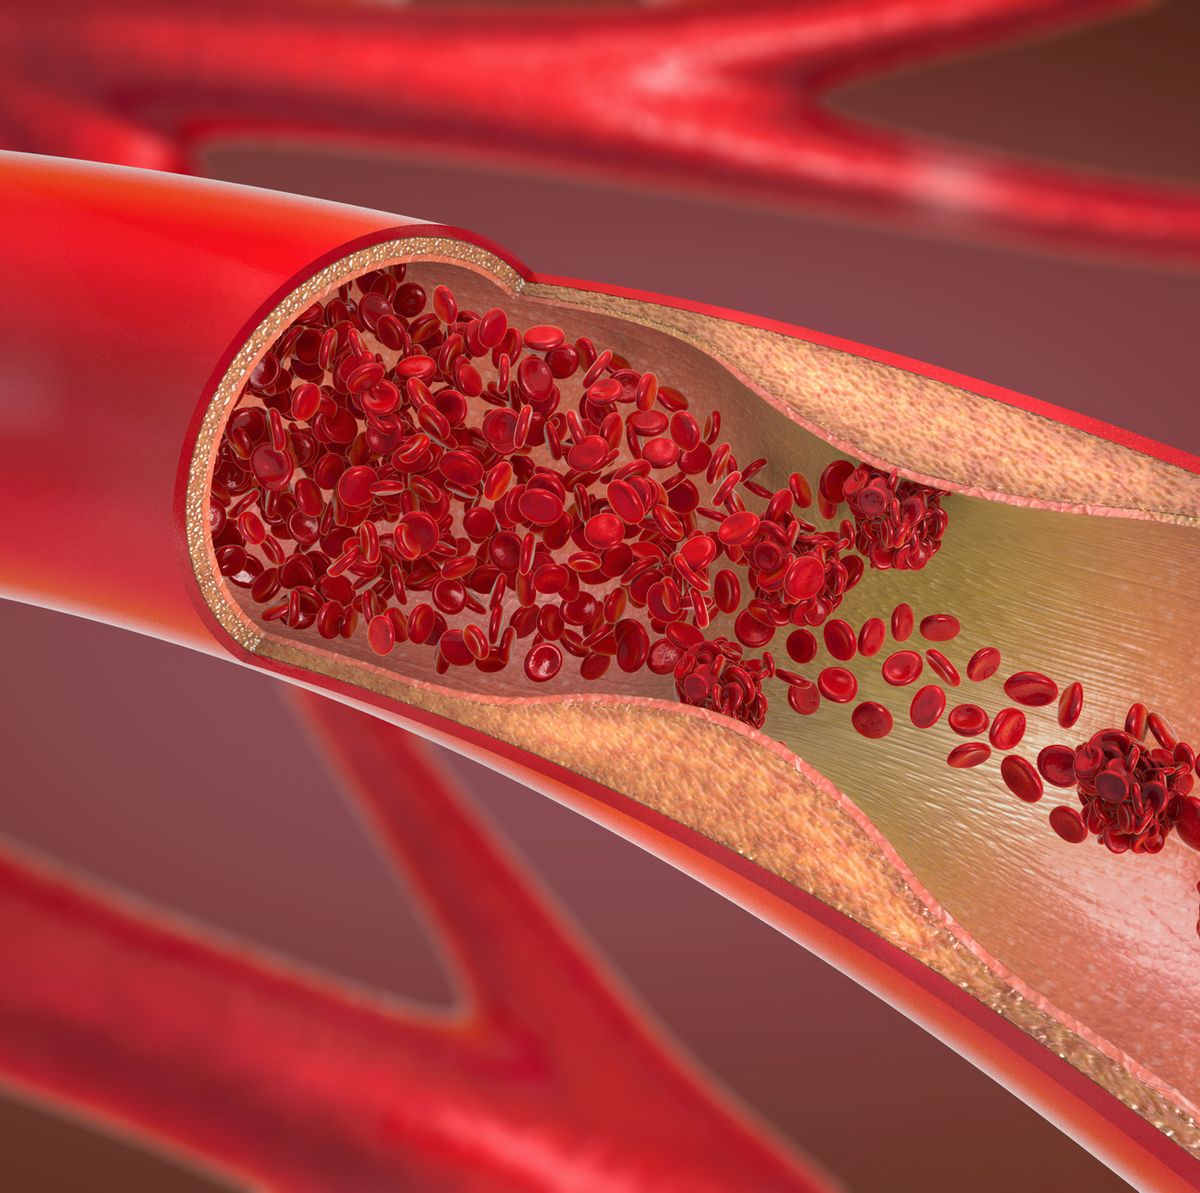 8 Signs of a Blood Clot - Symptoms in Legs, Chest, Neck, and More